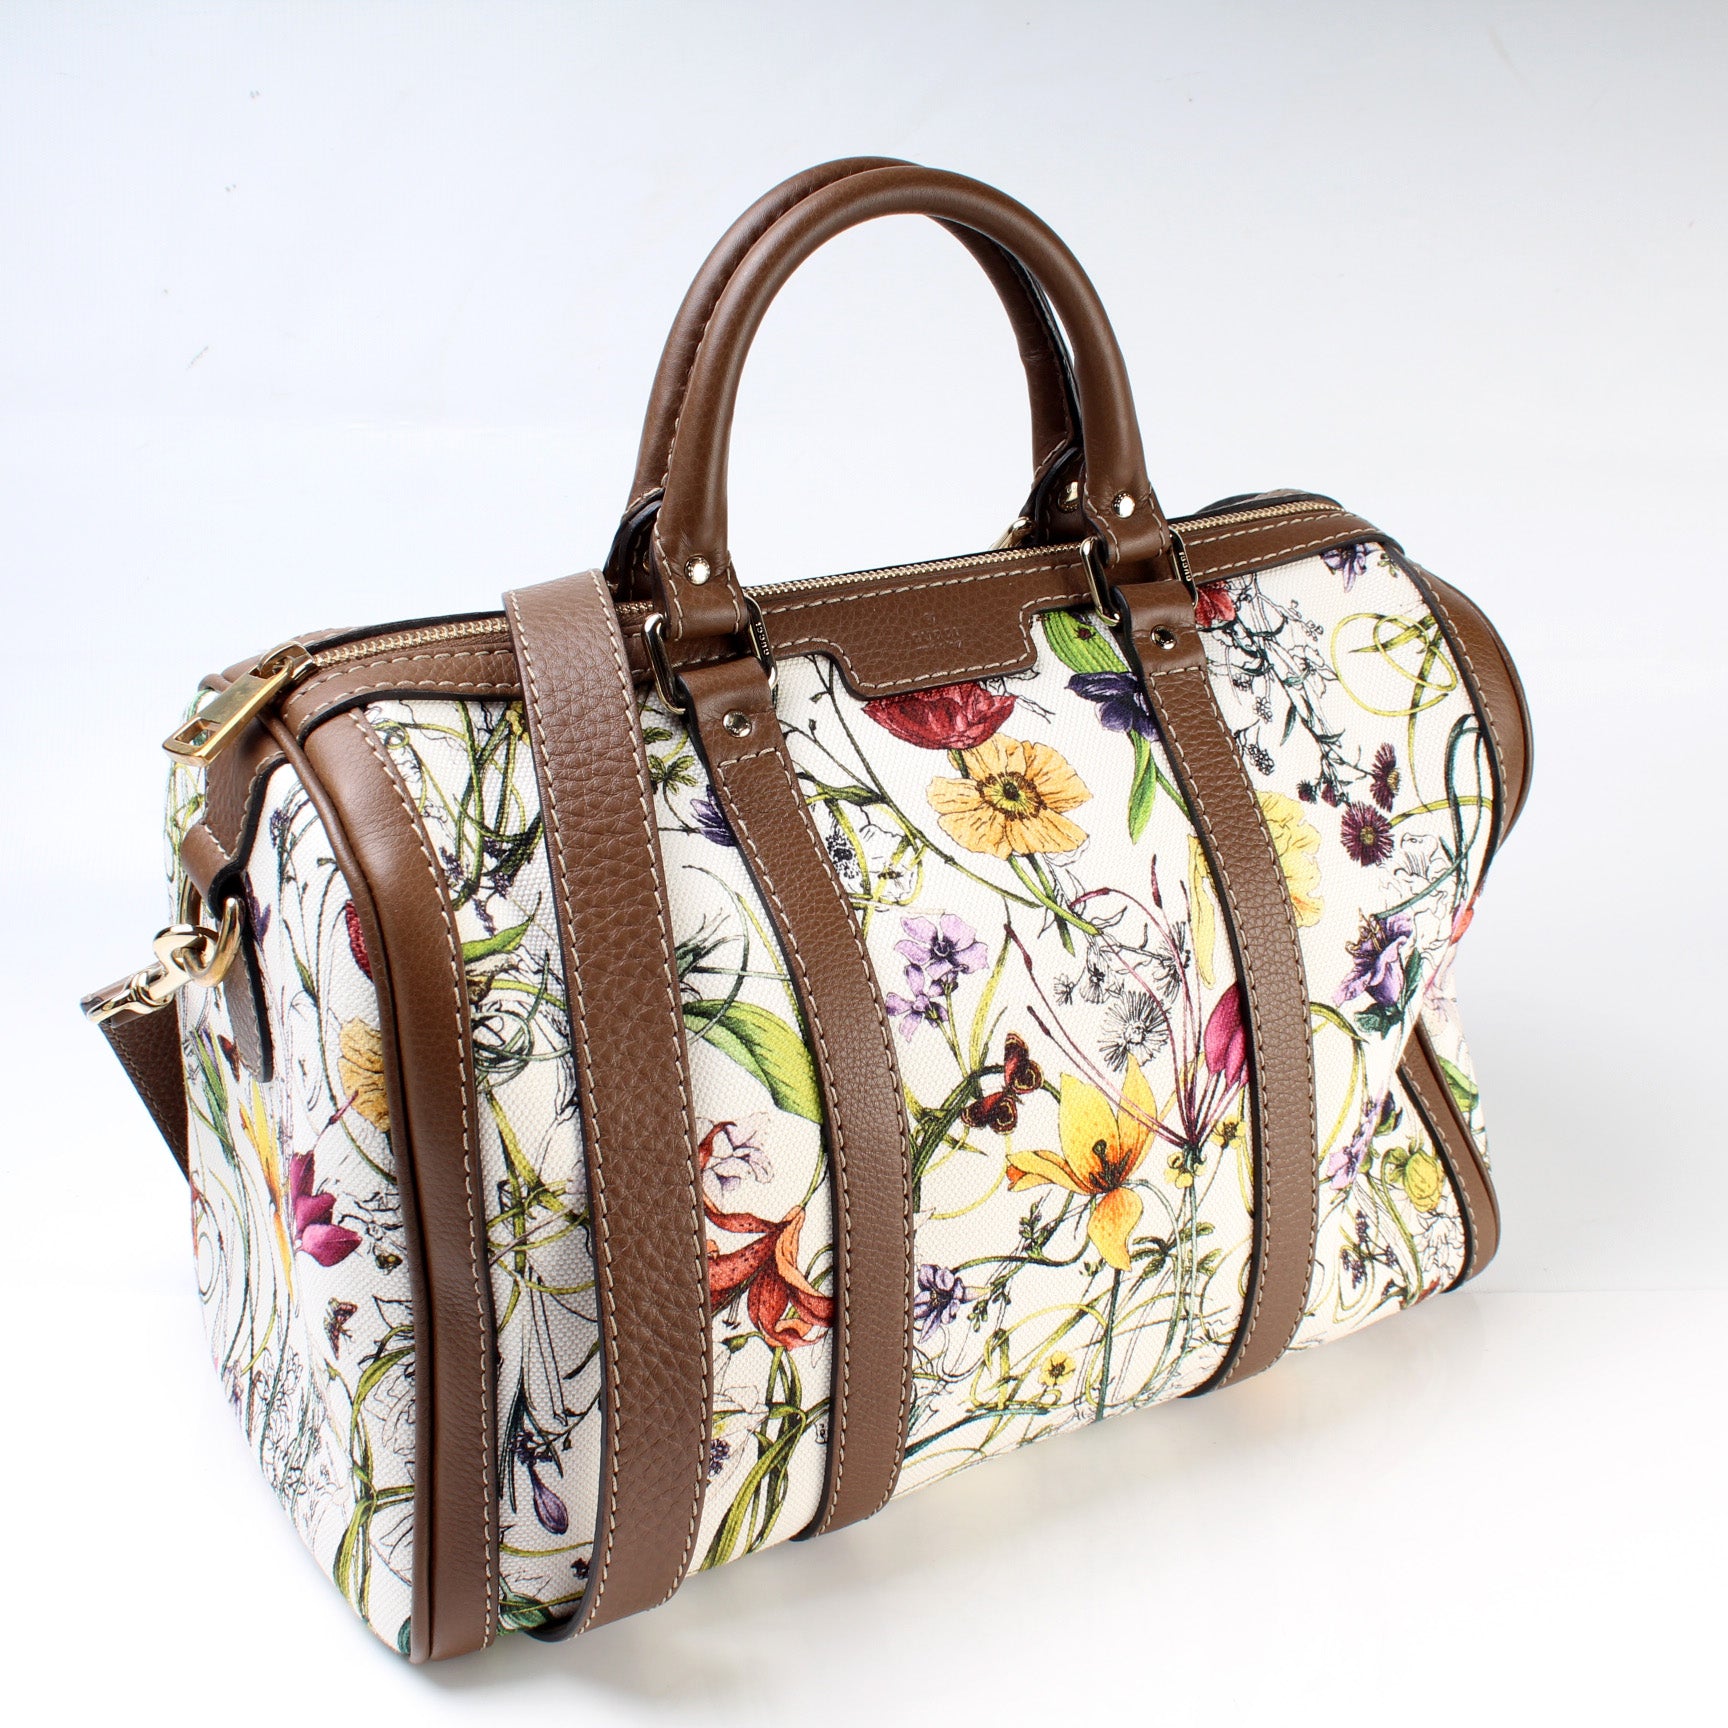 Gucci - Authenticated Boston Handbag - Leather Multicolour Floral for Women, Never Worn